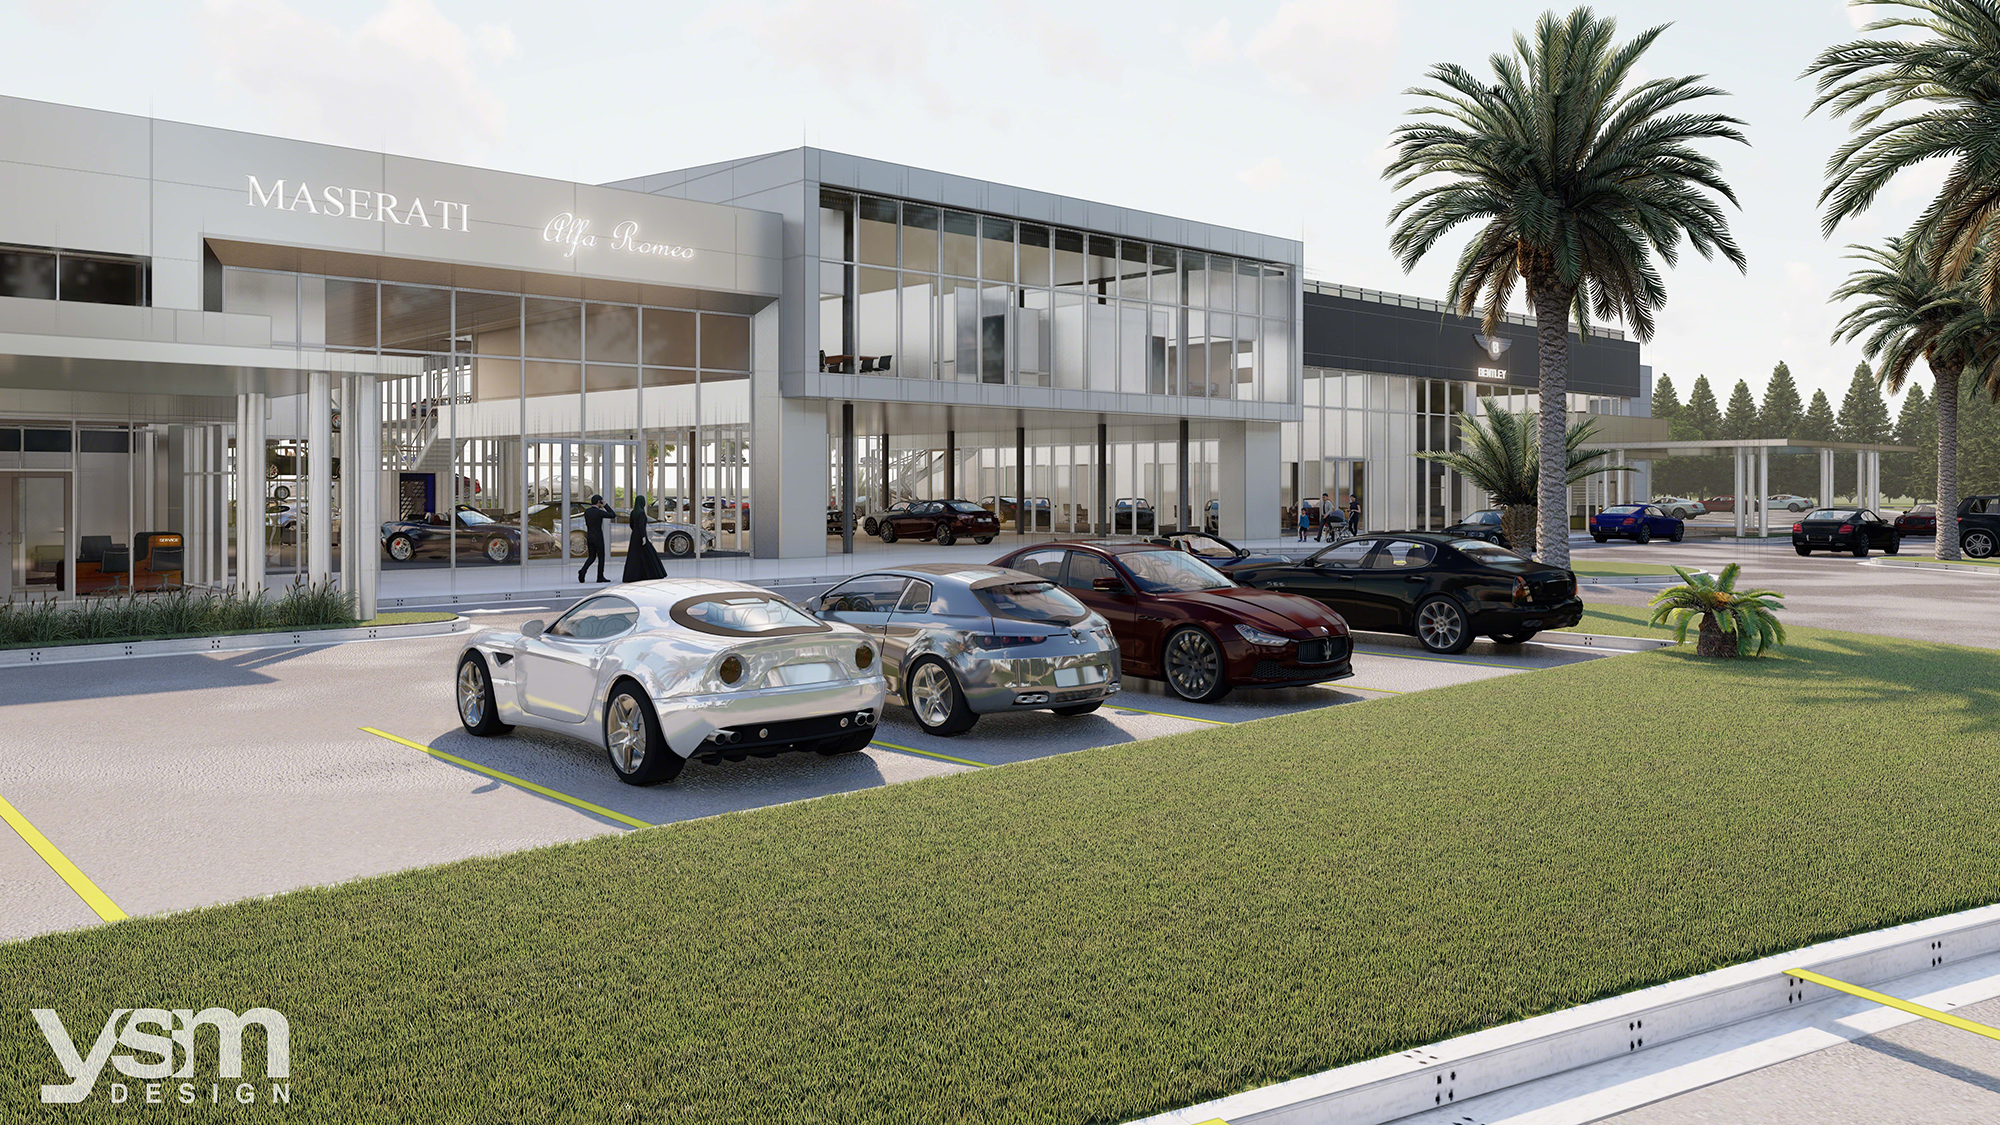 Brickell Motors is planning a dealership that will sell Bentley, Maserati and Alfa Romeo luxury vehicles.